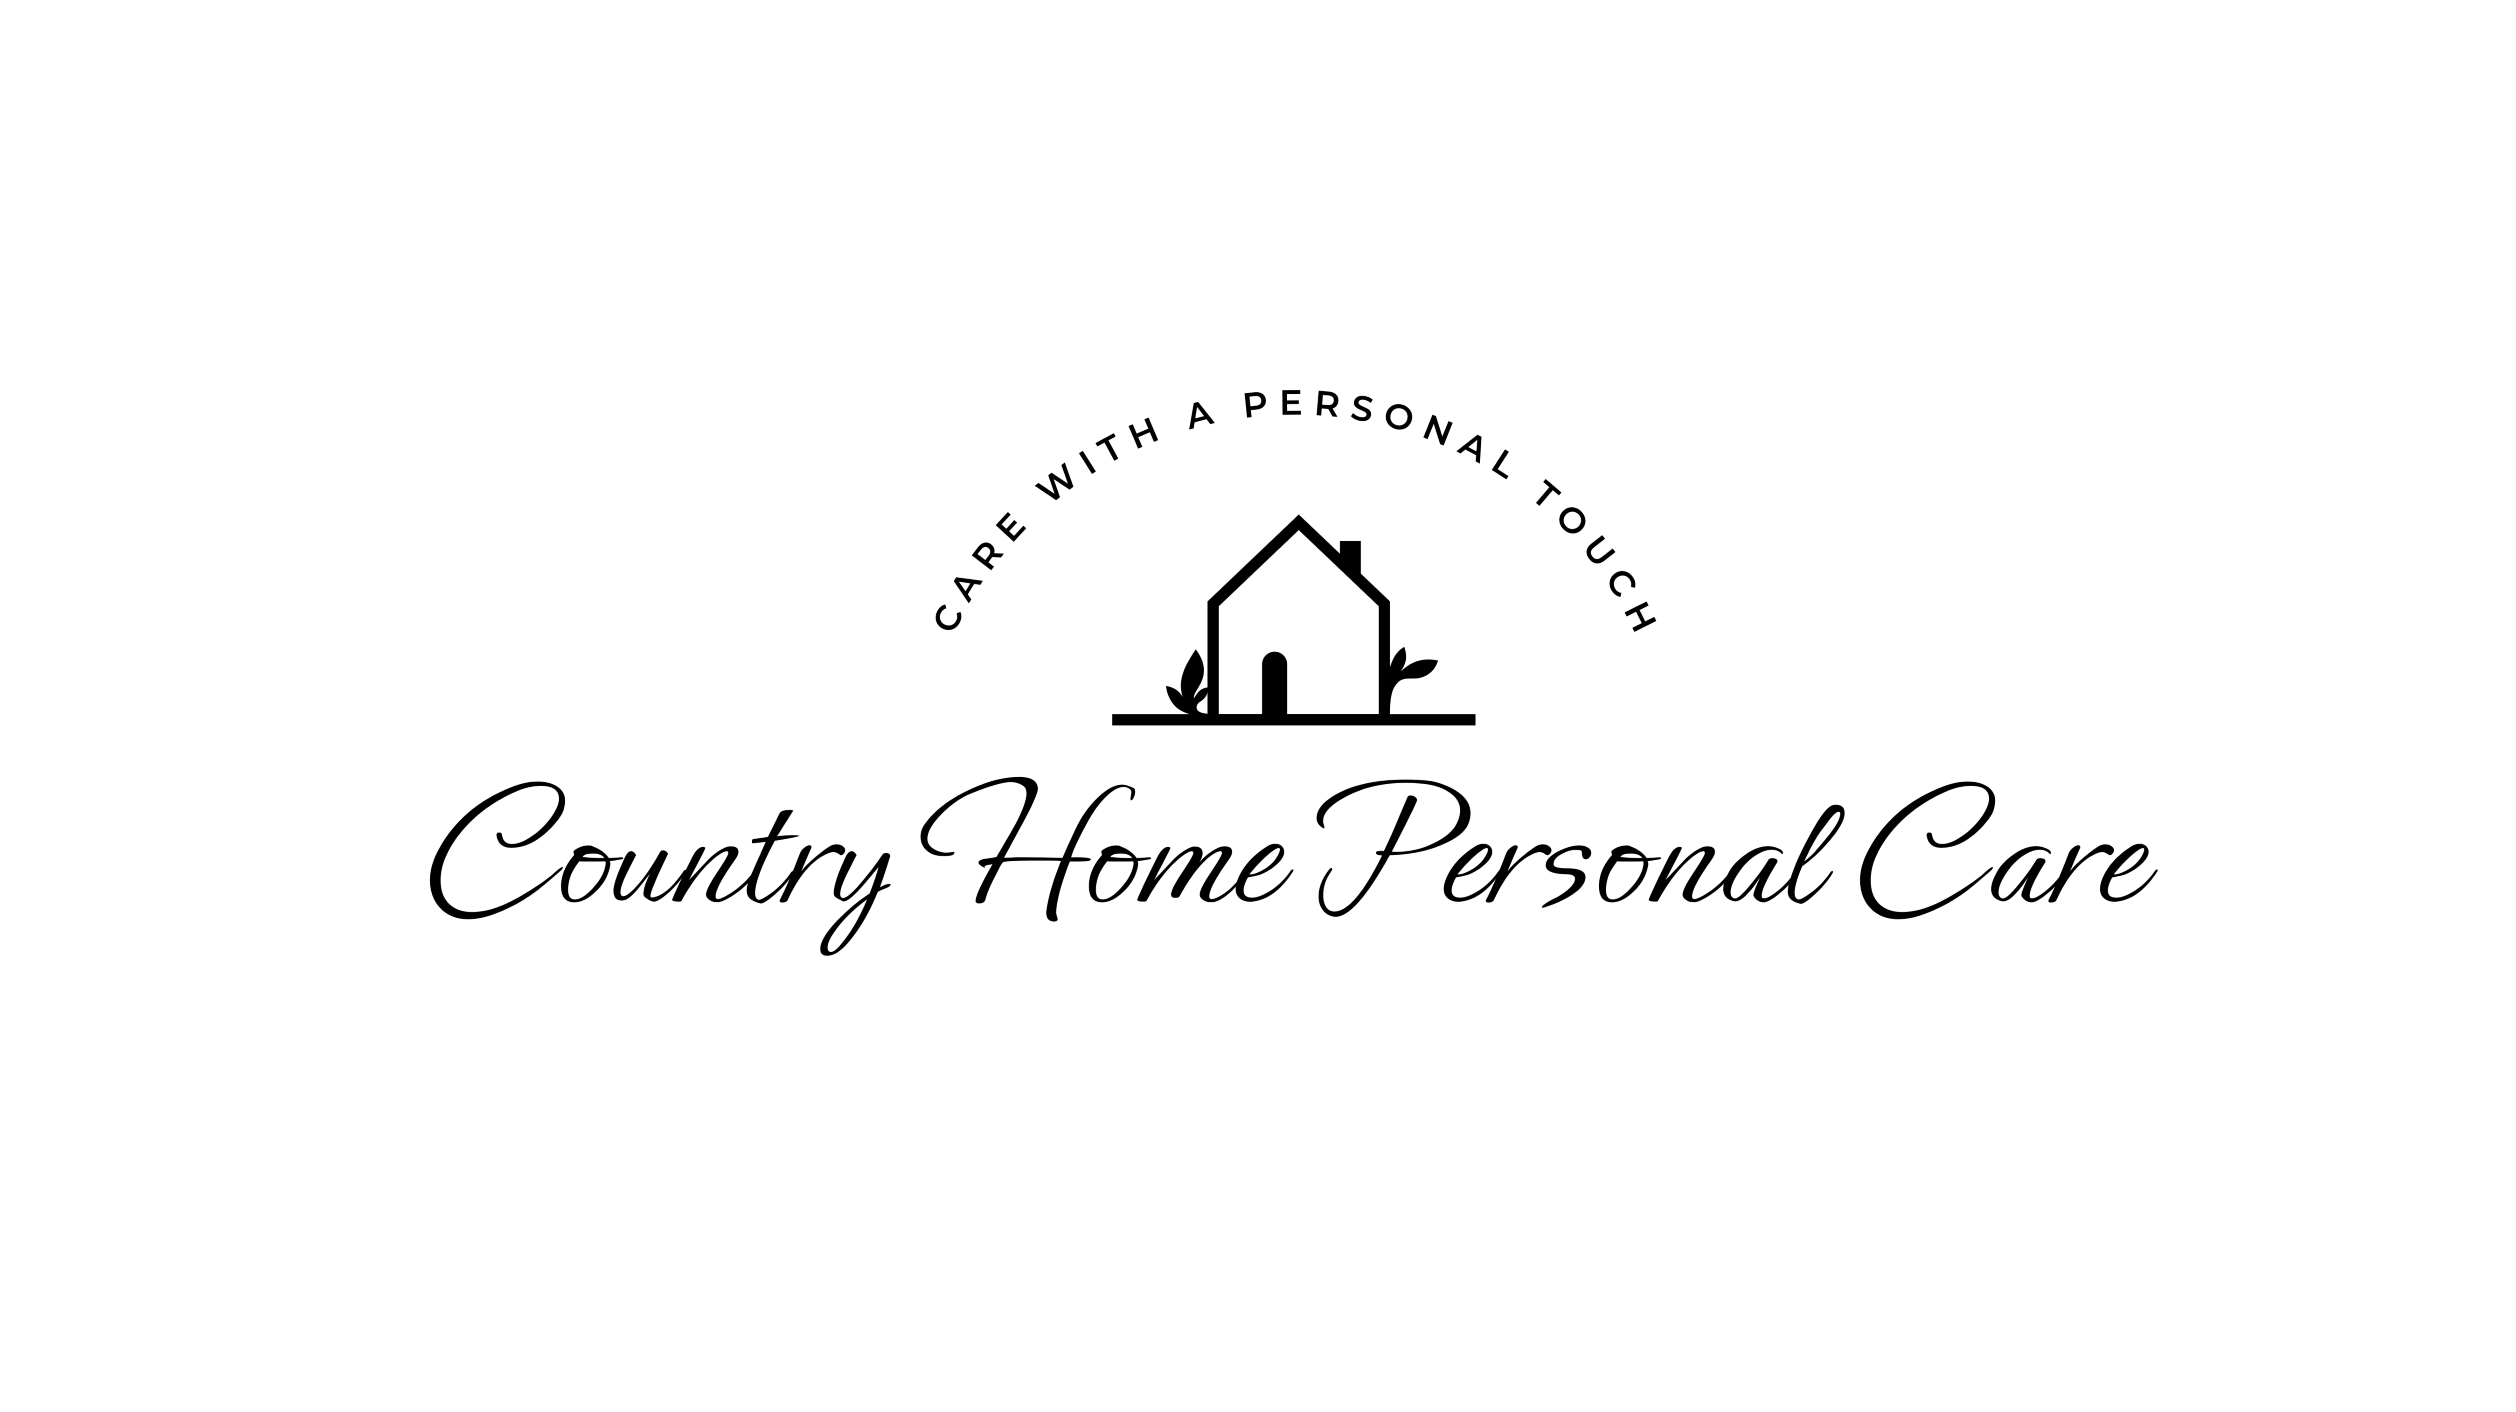 Country Home Personal Care image